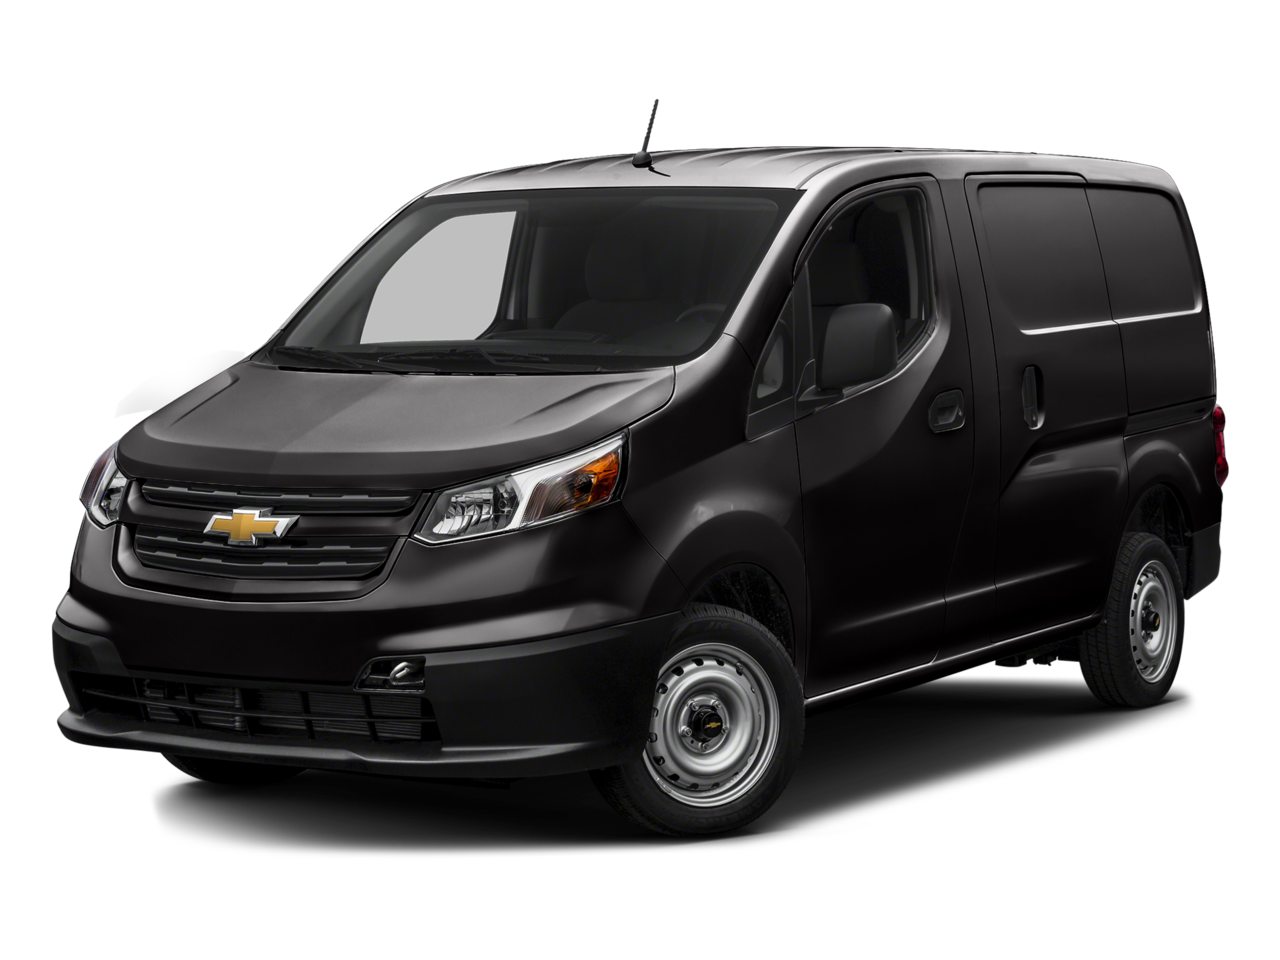 2016 Chevrolet City Express Repair: Service and Maintenance Cost